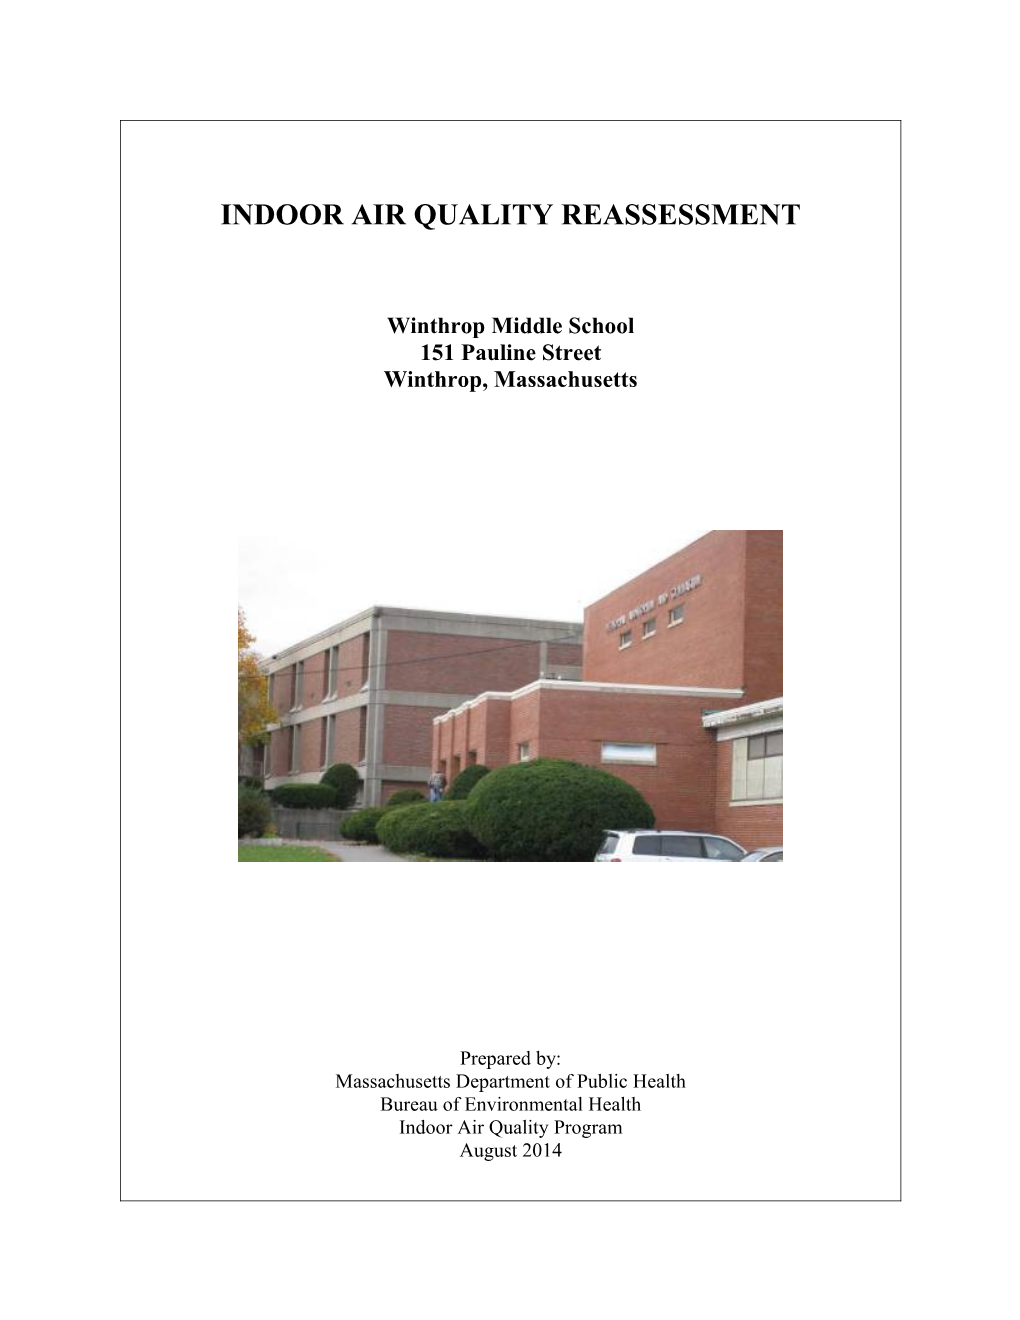 Indoor Air Quality Reassessment - Winthrop Middle School